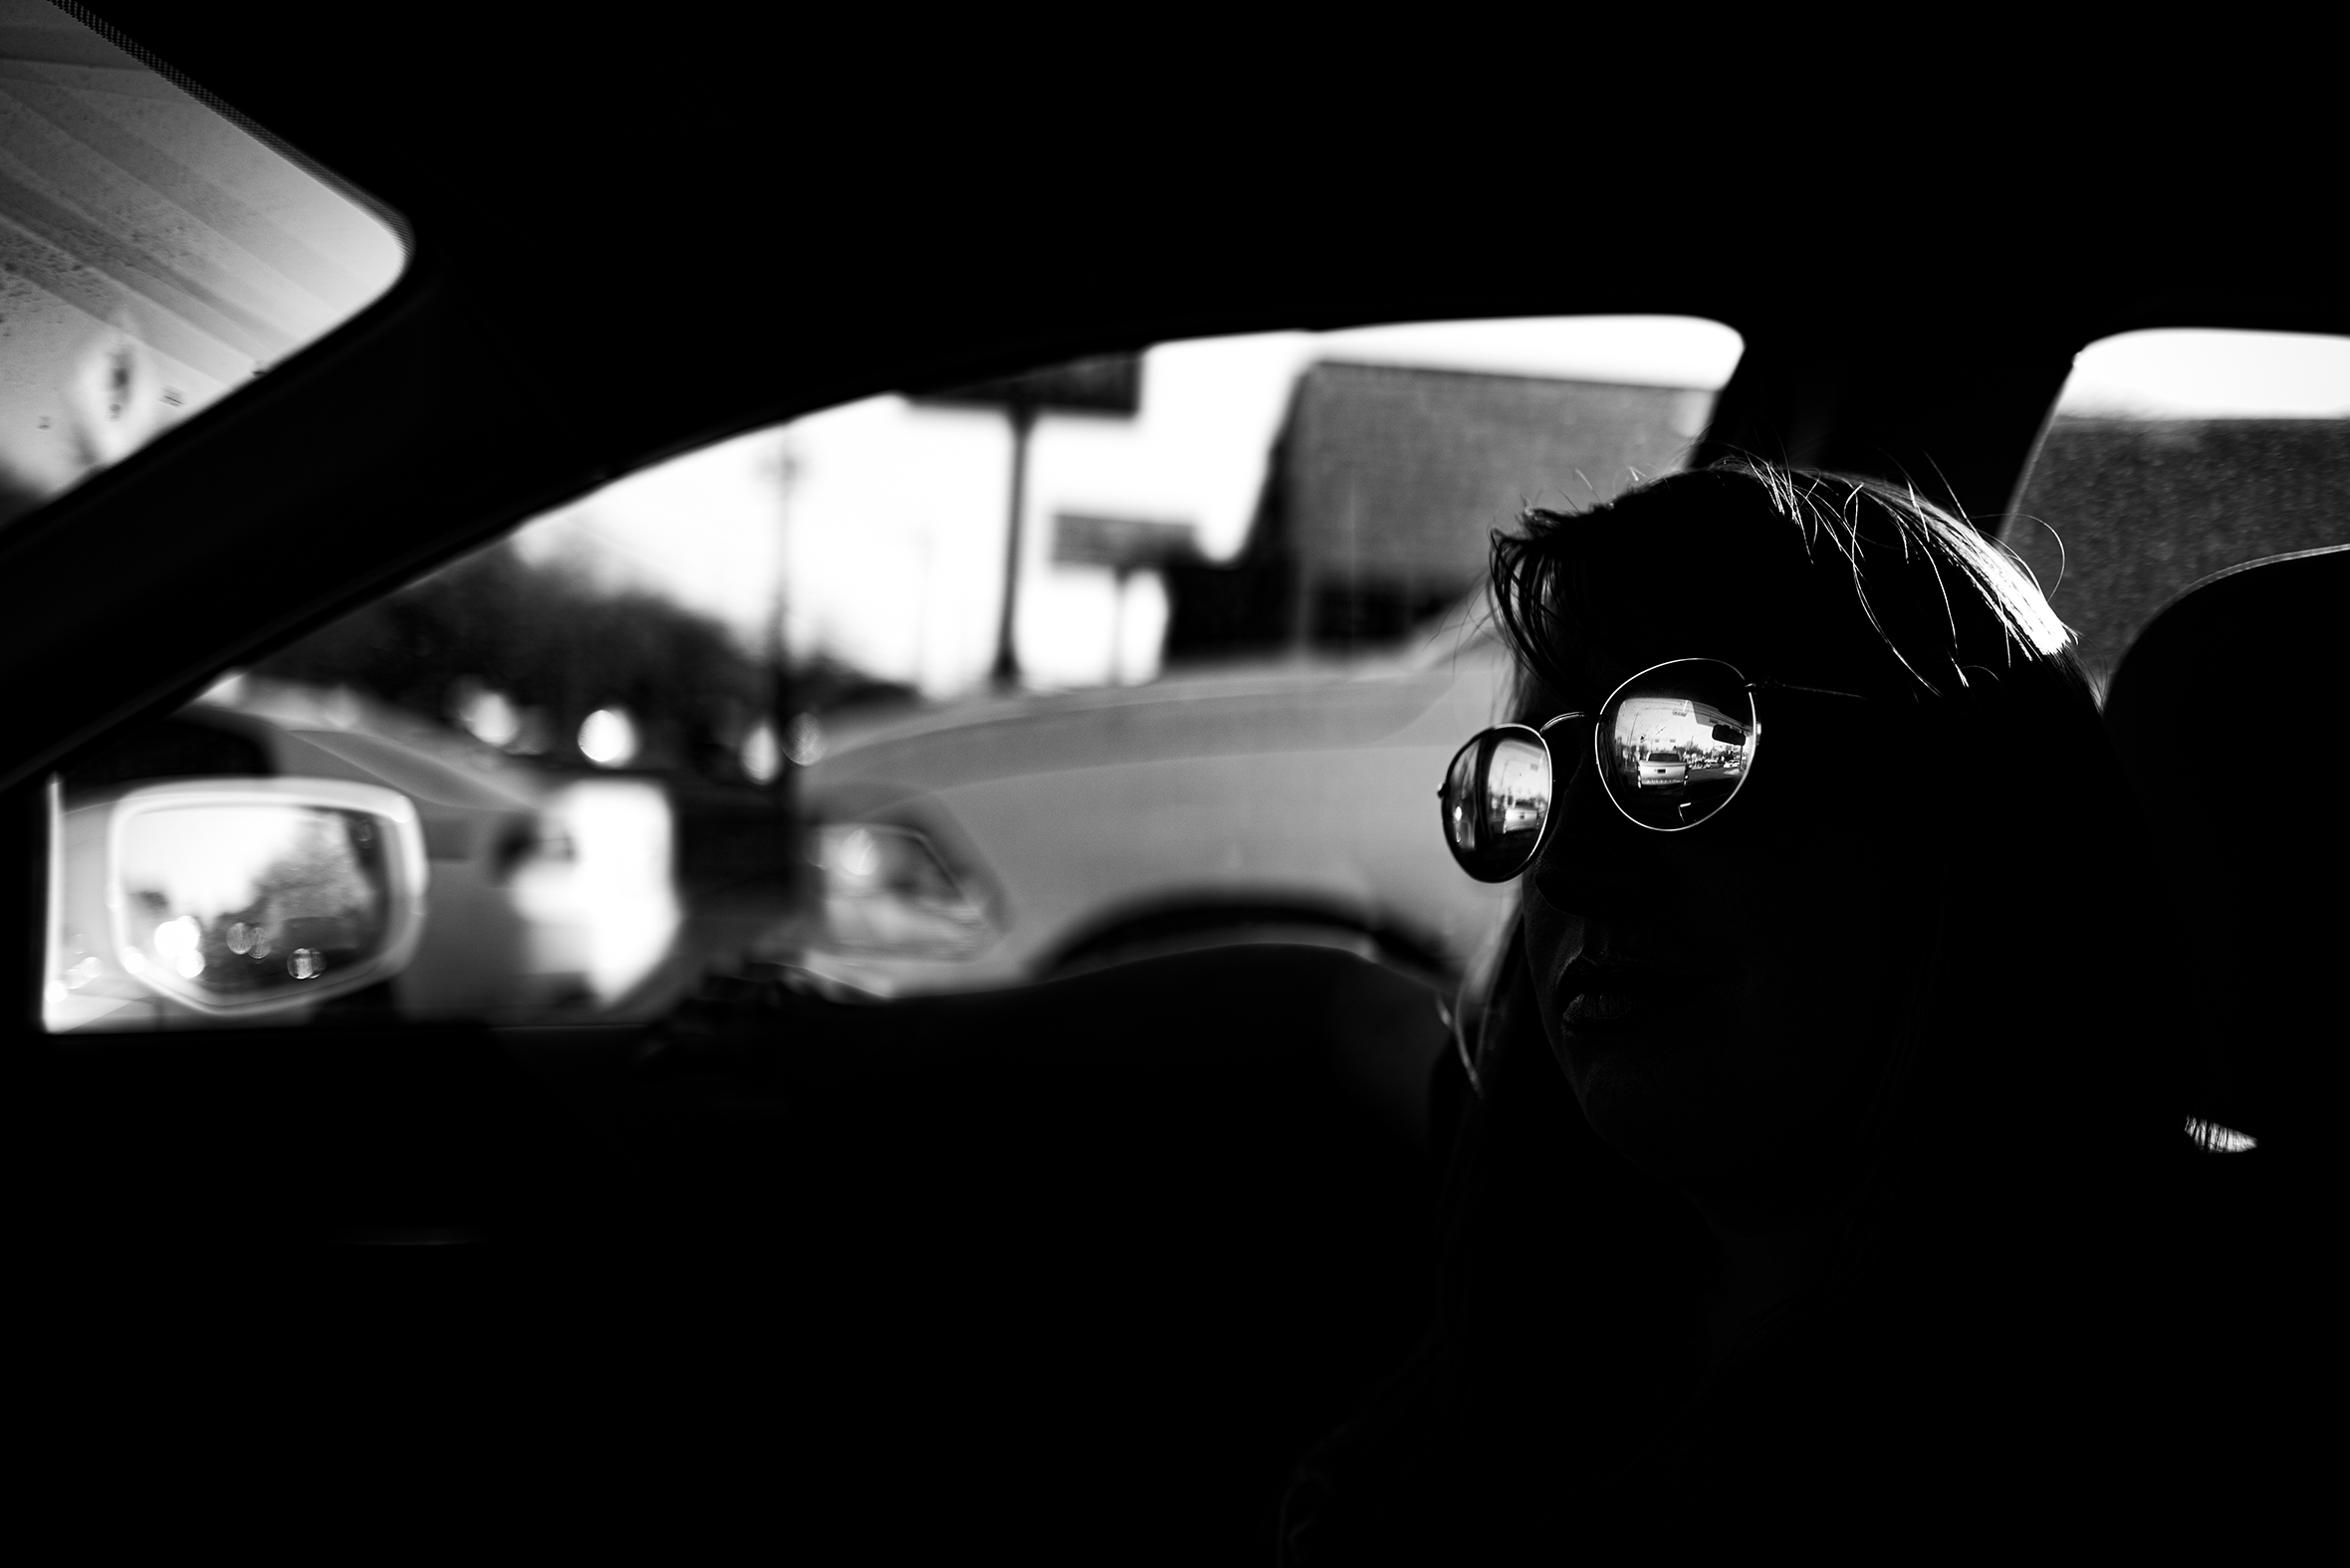 Looking into a car from the driver’s side window out to the street beyond. Everything in the car interior is black except for the shine from the sunglass lenses of a person in the front passenger seat.